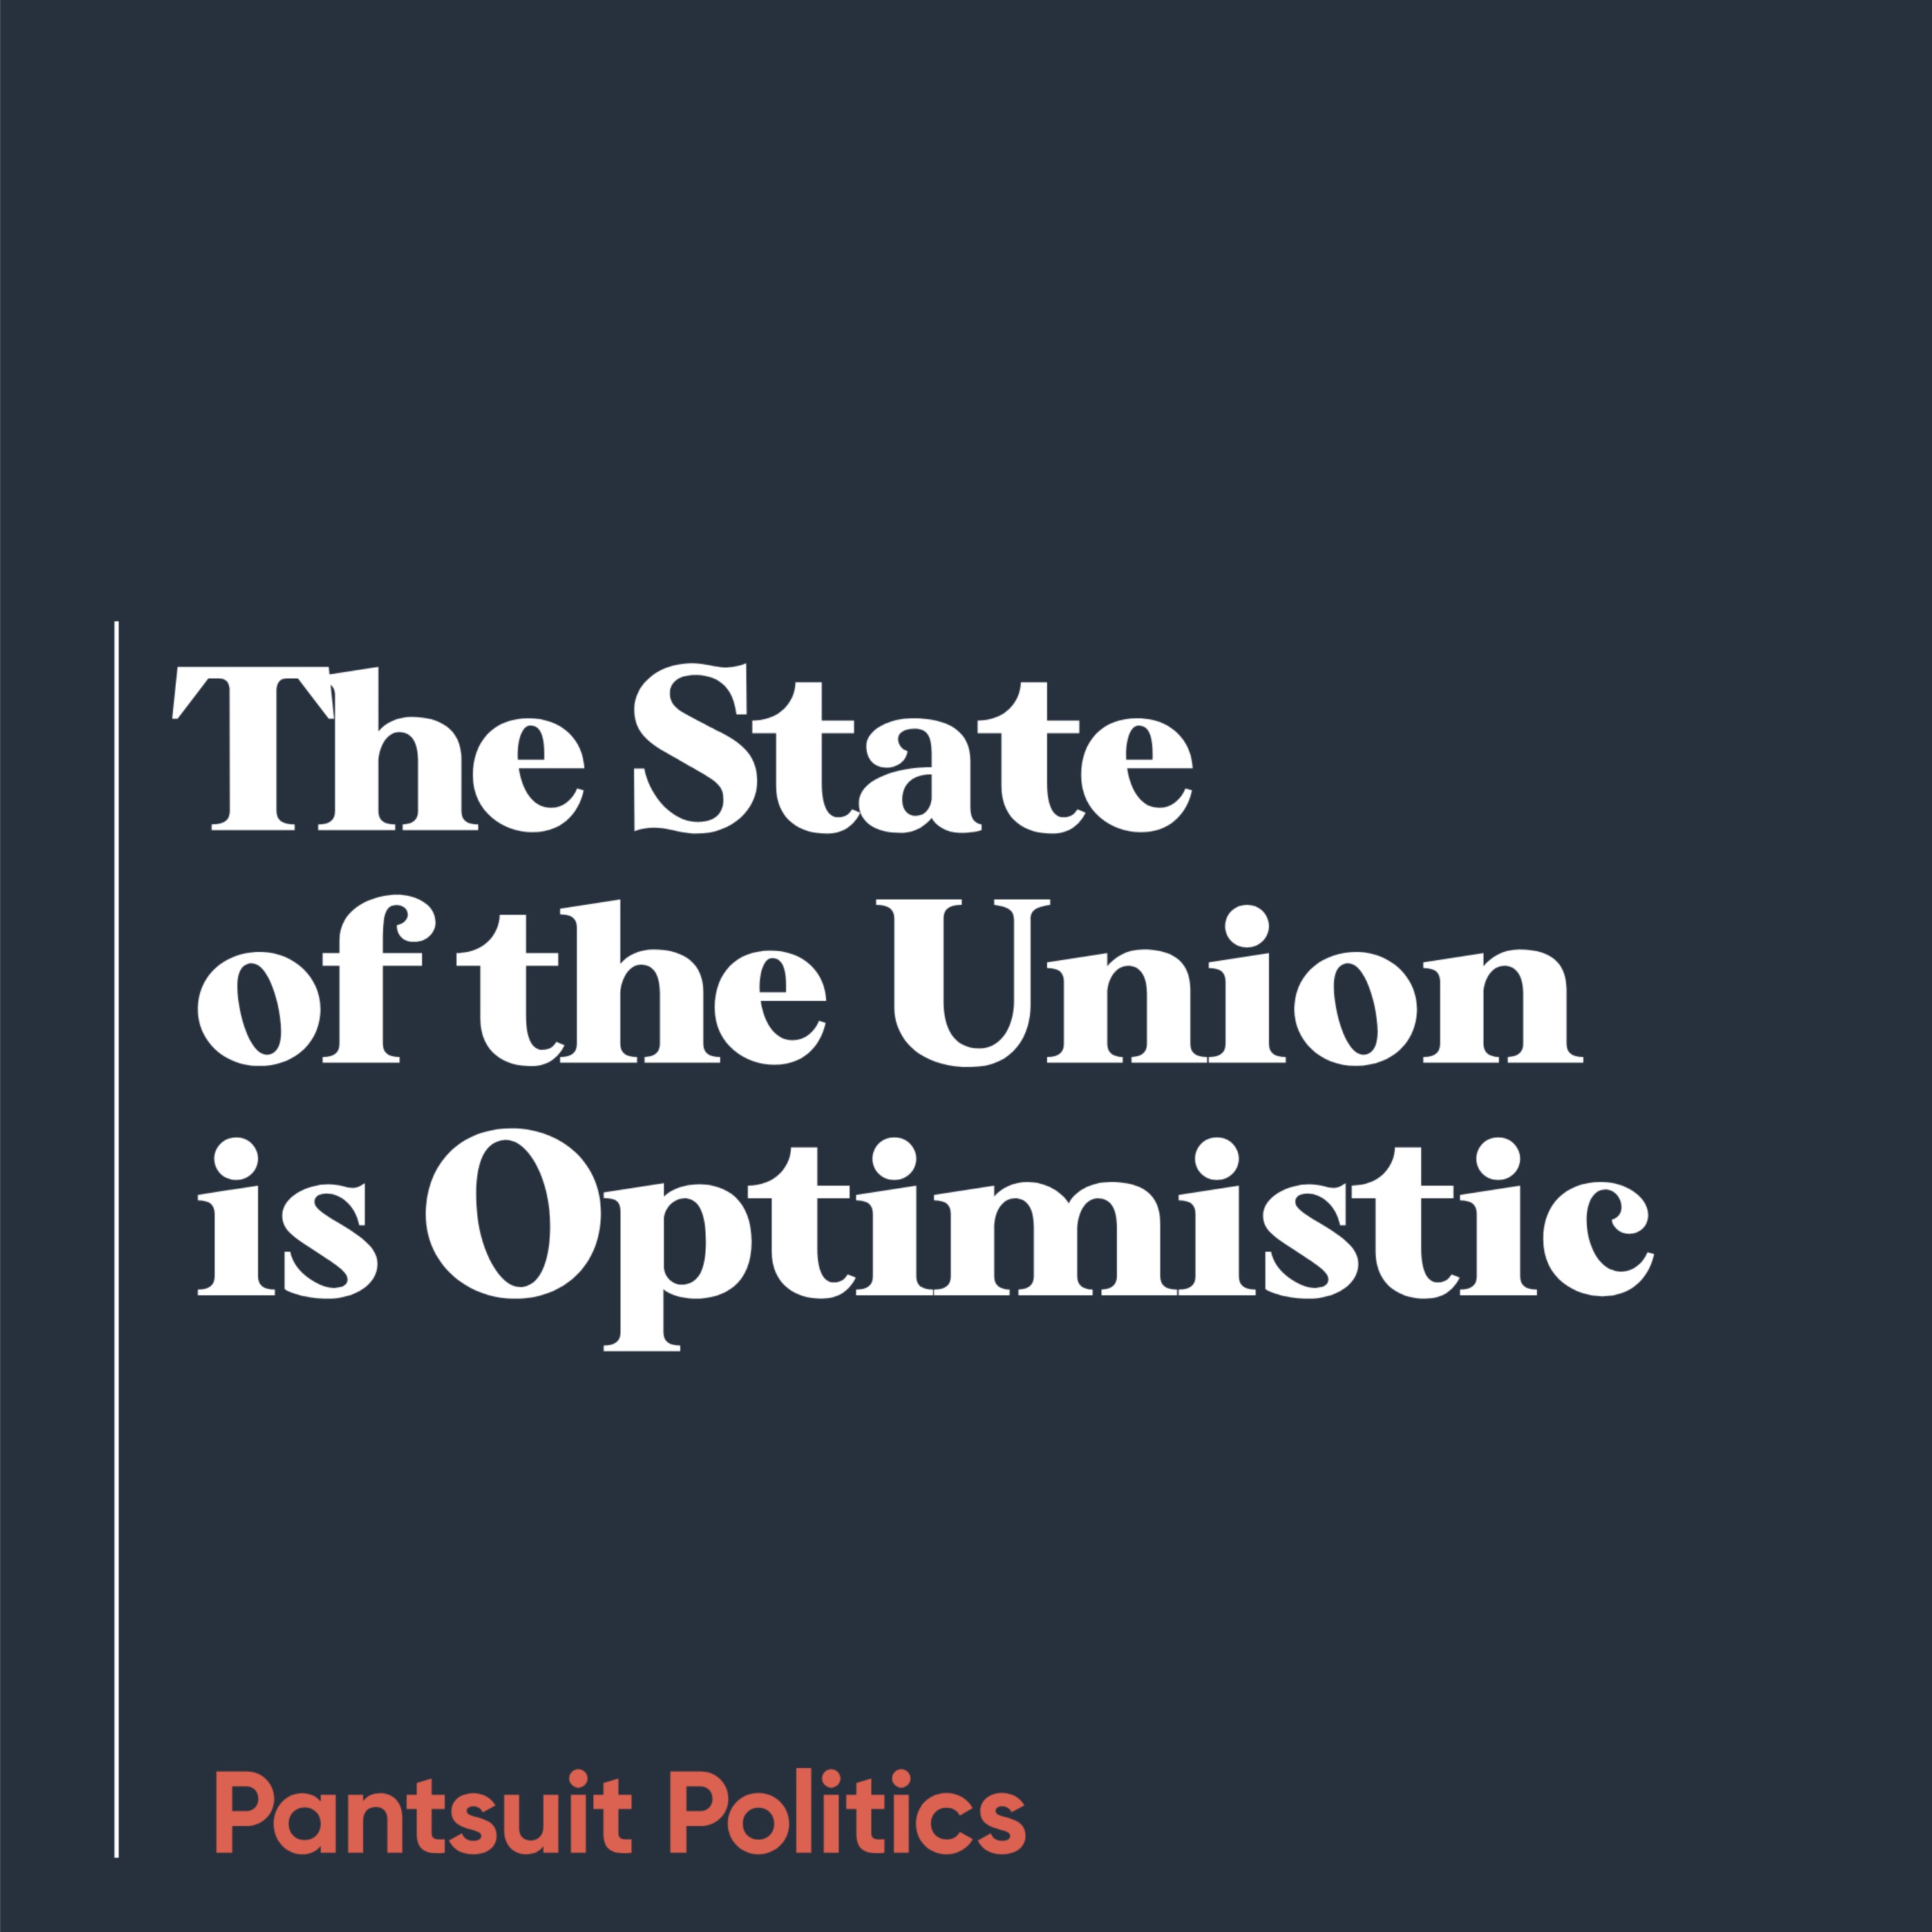 The State of the Union is Optimistic